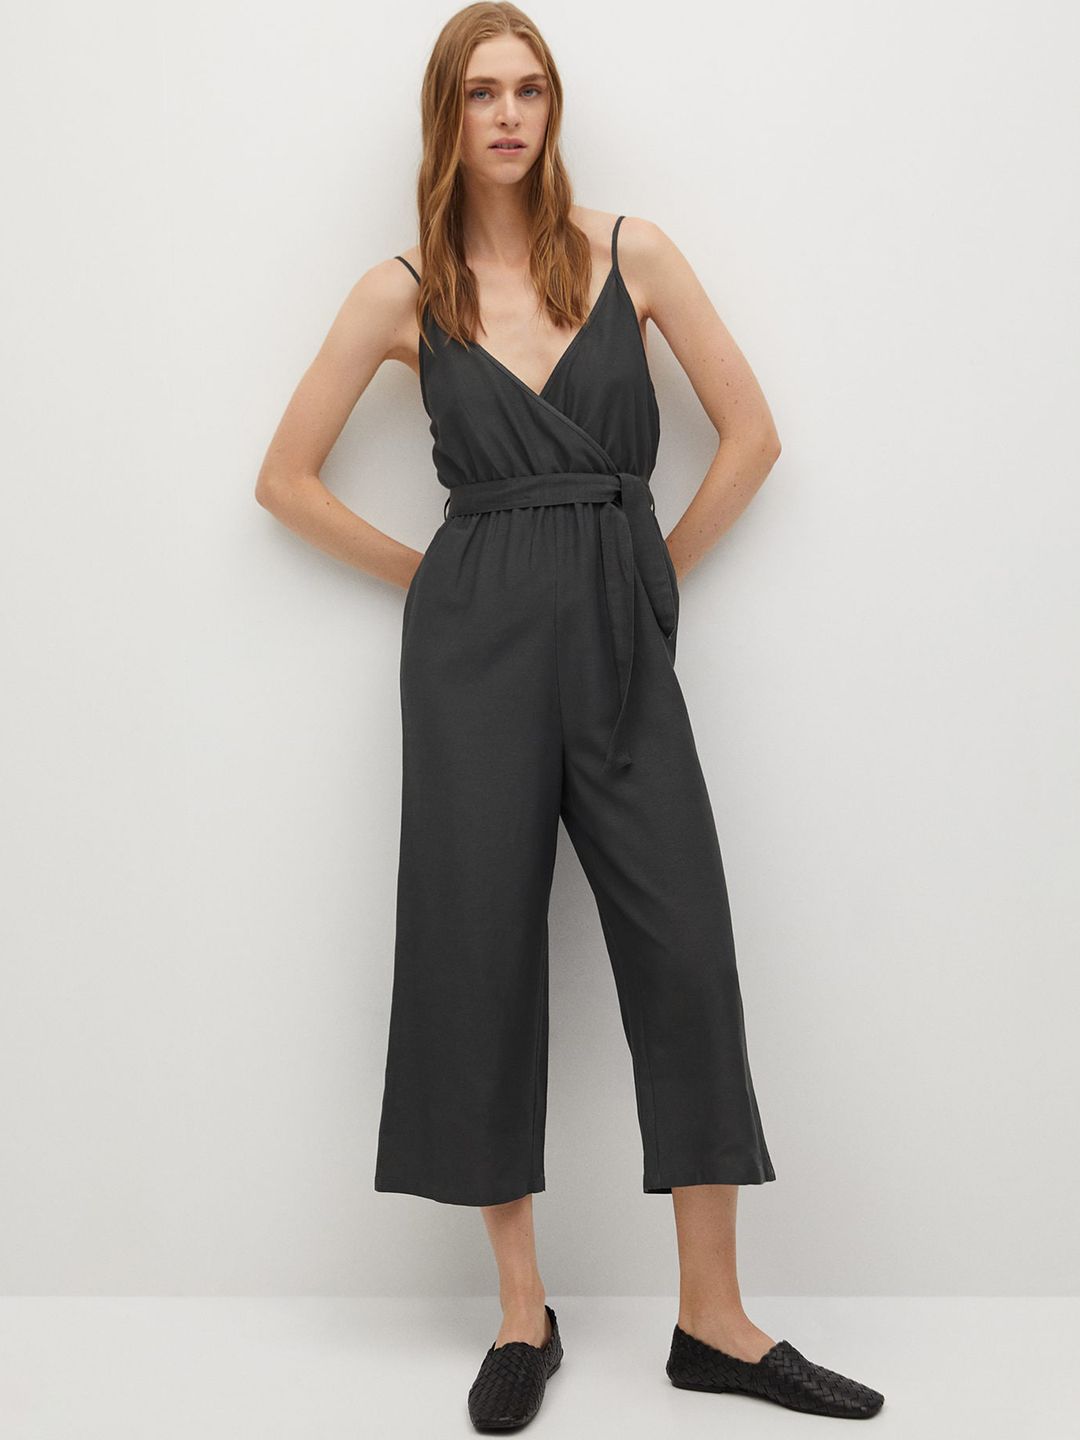 MANGO Women Charcoal Grey Solid Culotte Jumpsuit Price in India